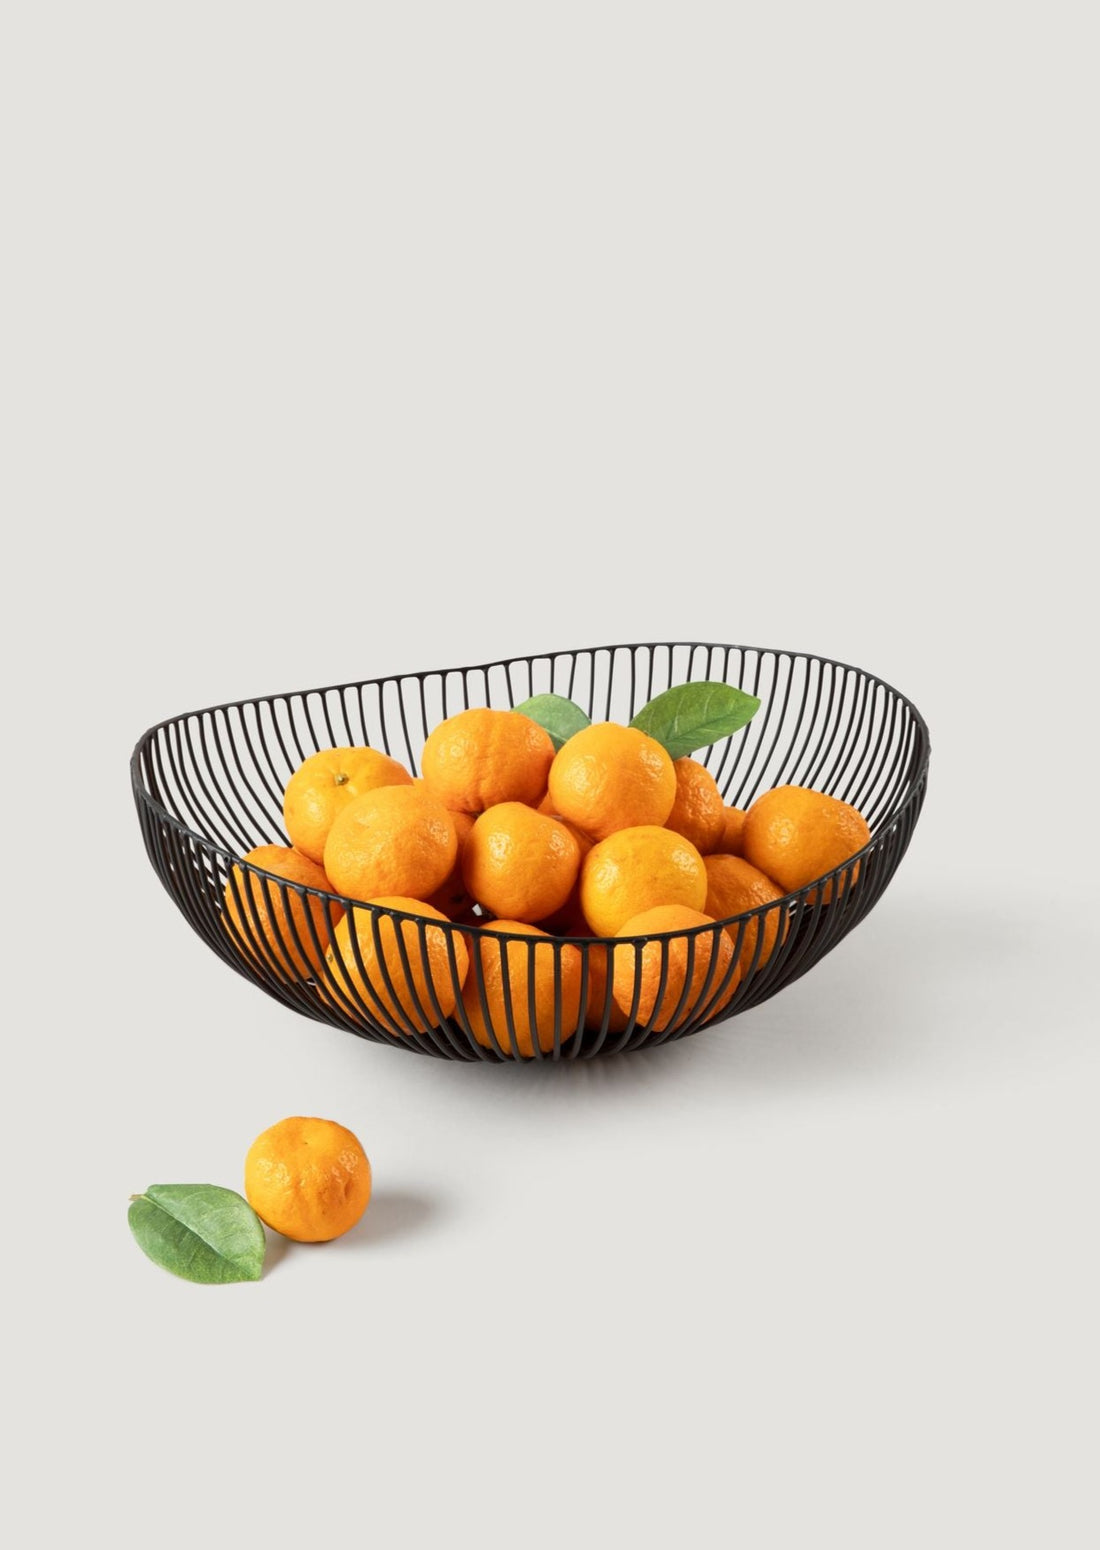 Handcrafted Iron Oval Basket Styled with Oranges